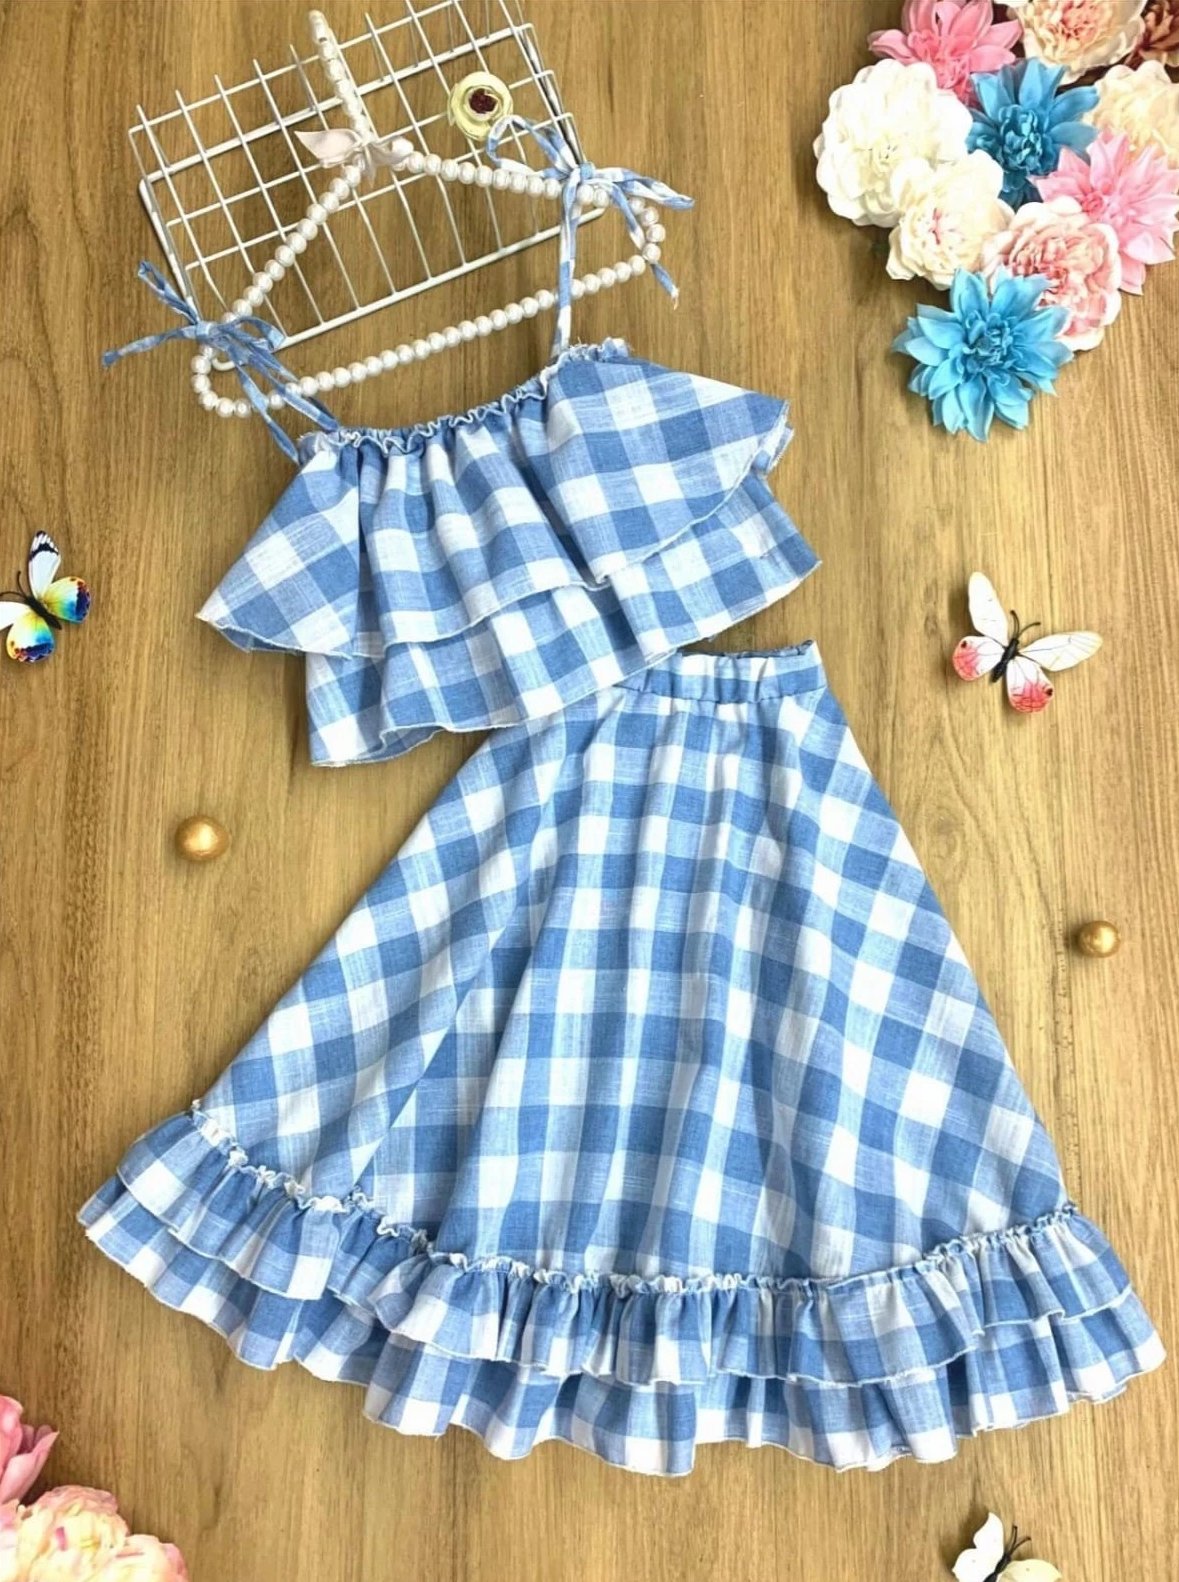 Girls Plaid Double Ruffle Crop Top and Maxi Skirt Set - Blue / 2T/3T - Girls Spring Casual Set